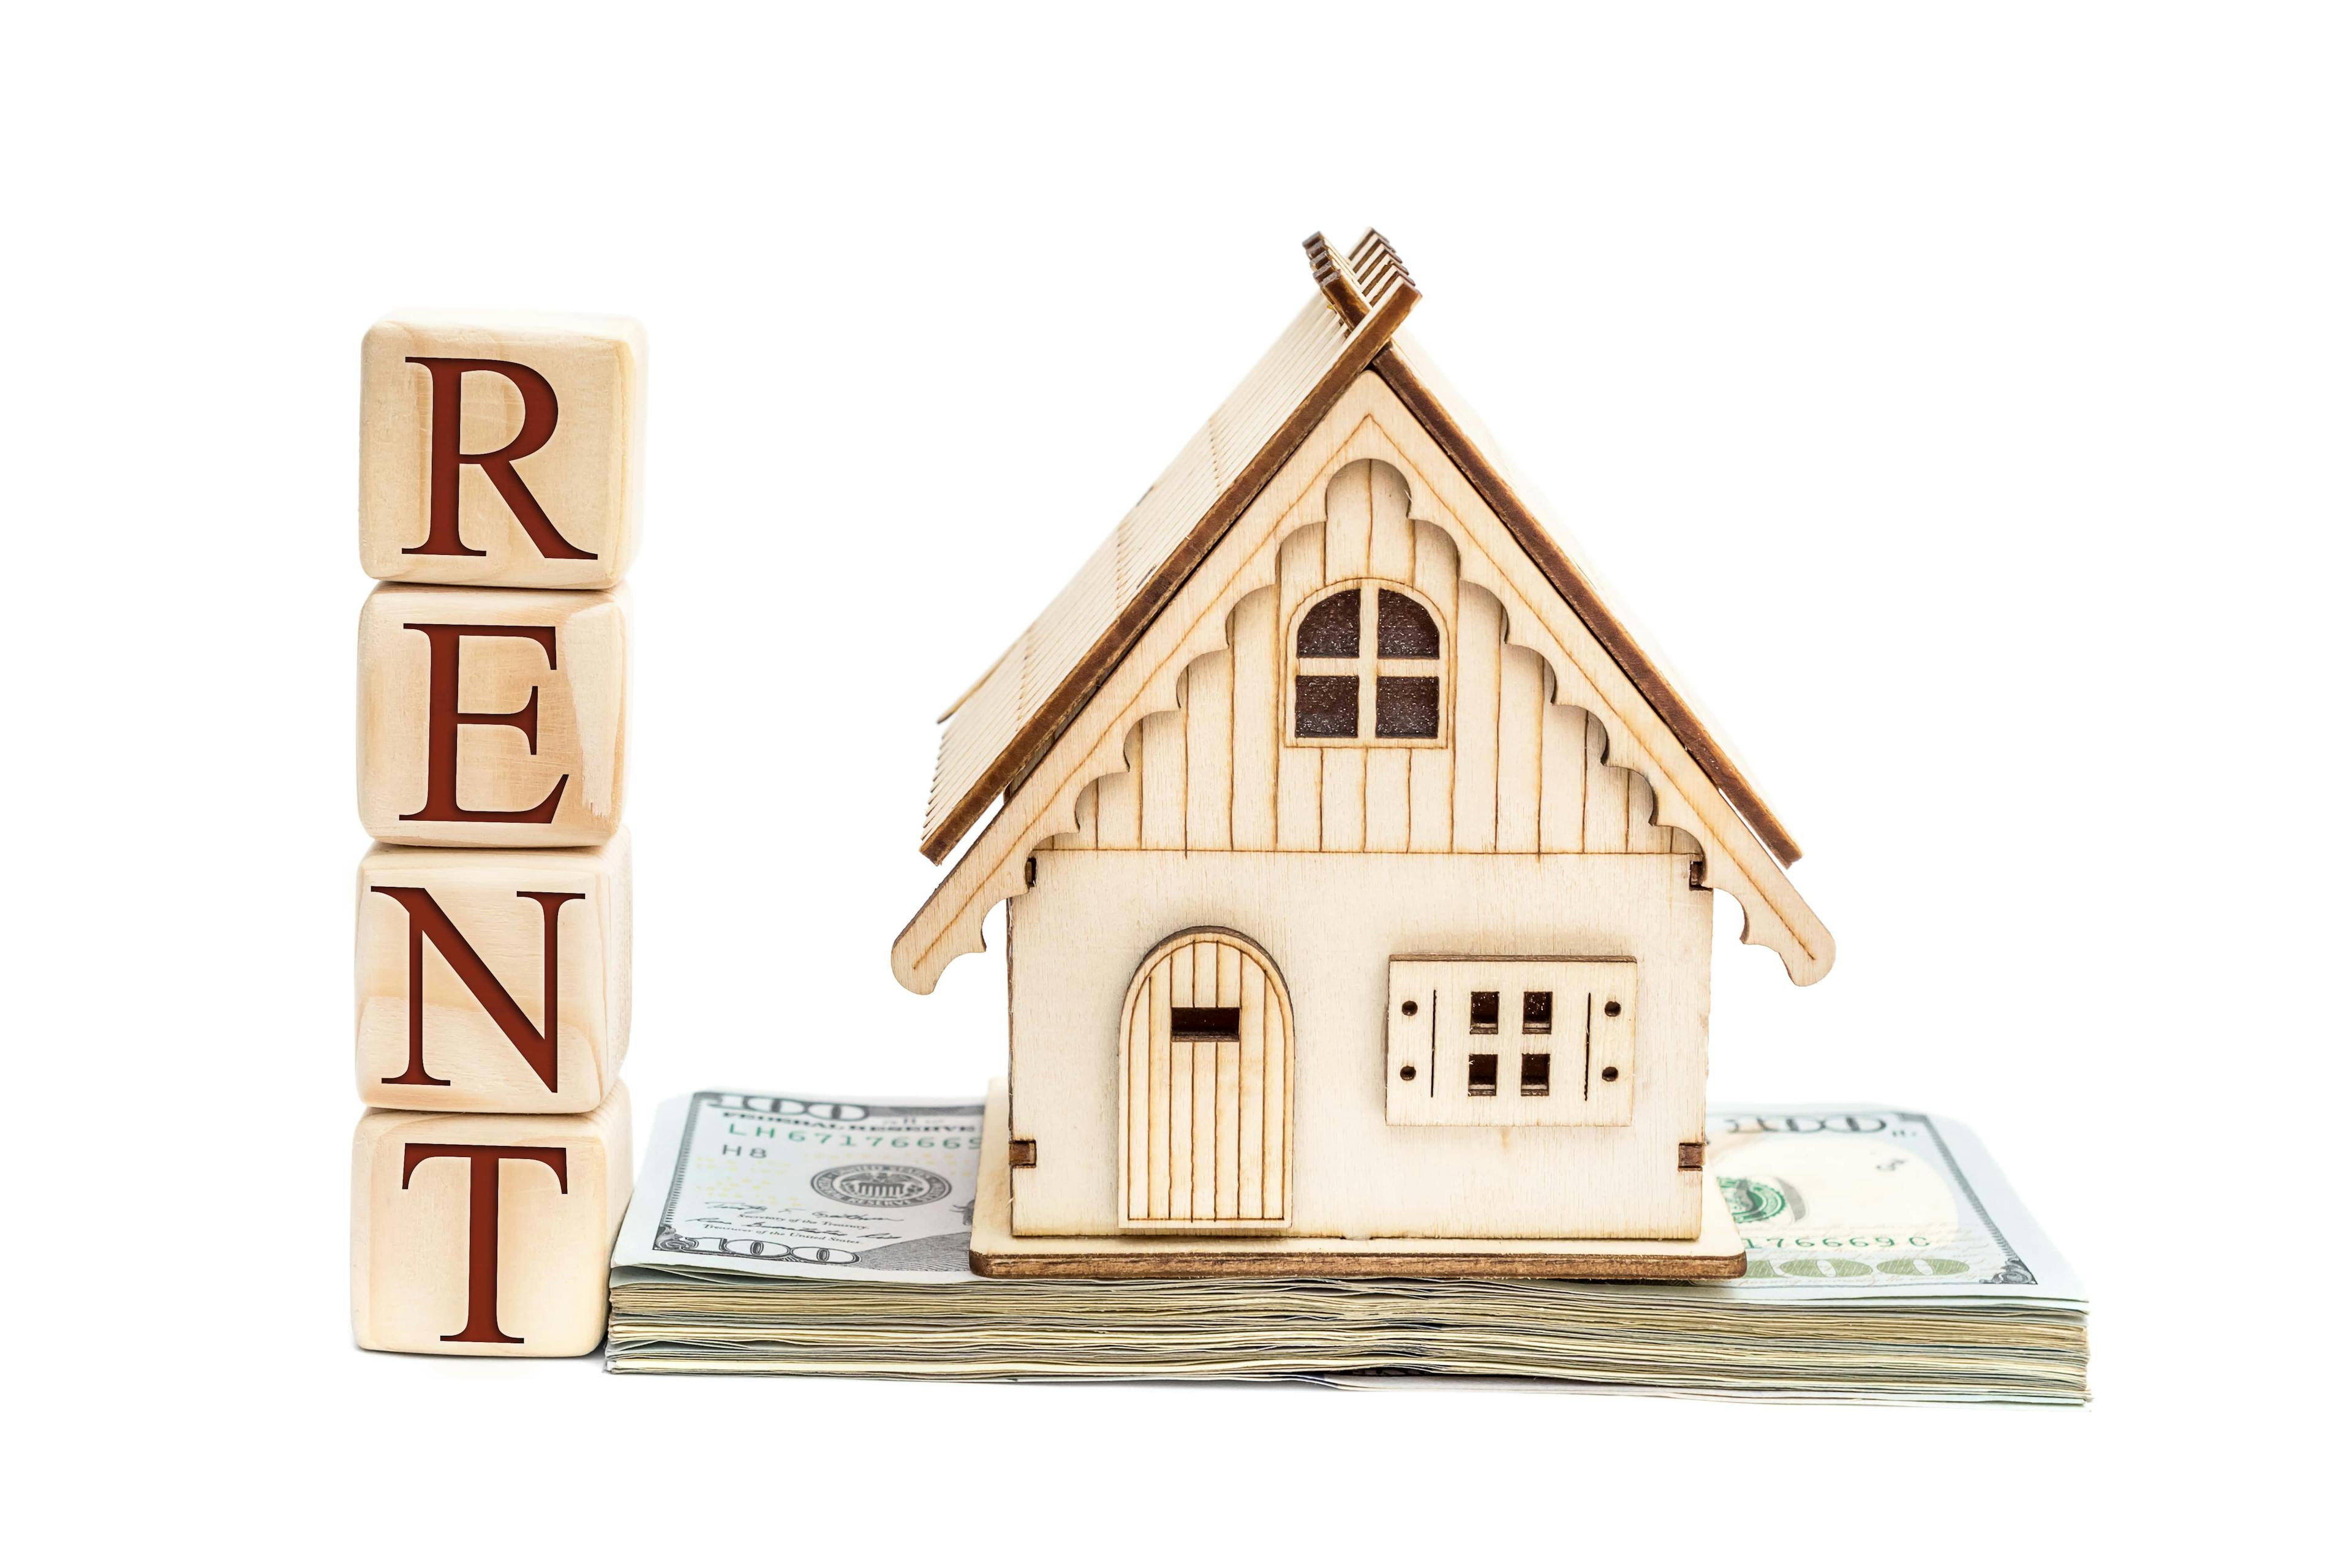 Image of a model of a rental property and wooden blocks that spell "Rent"